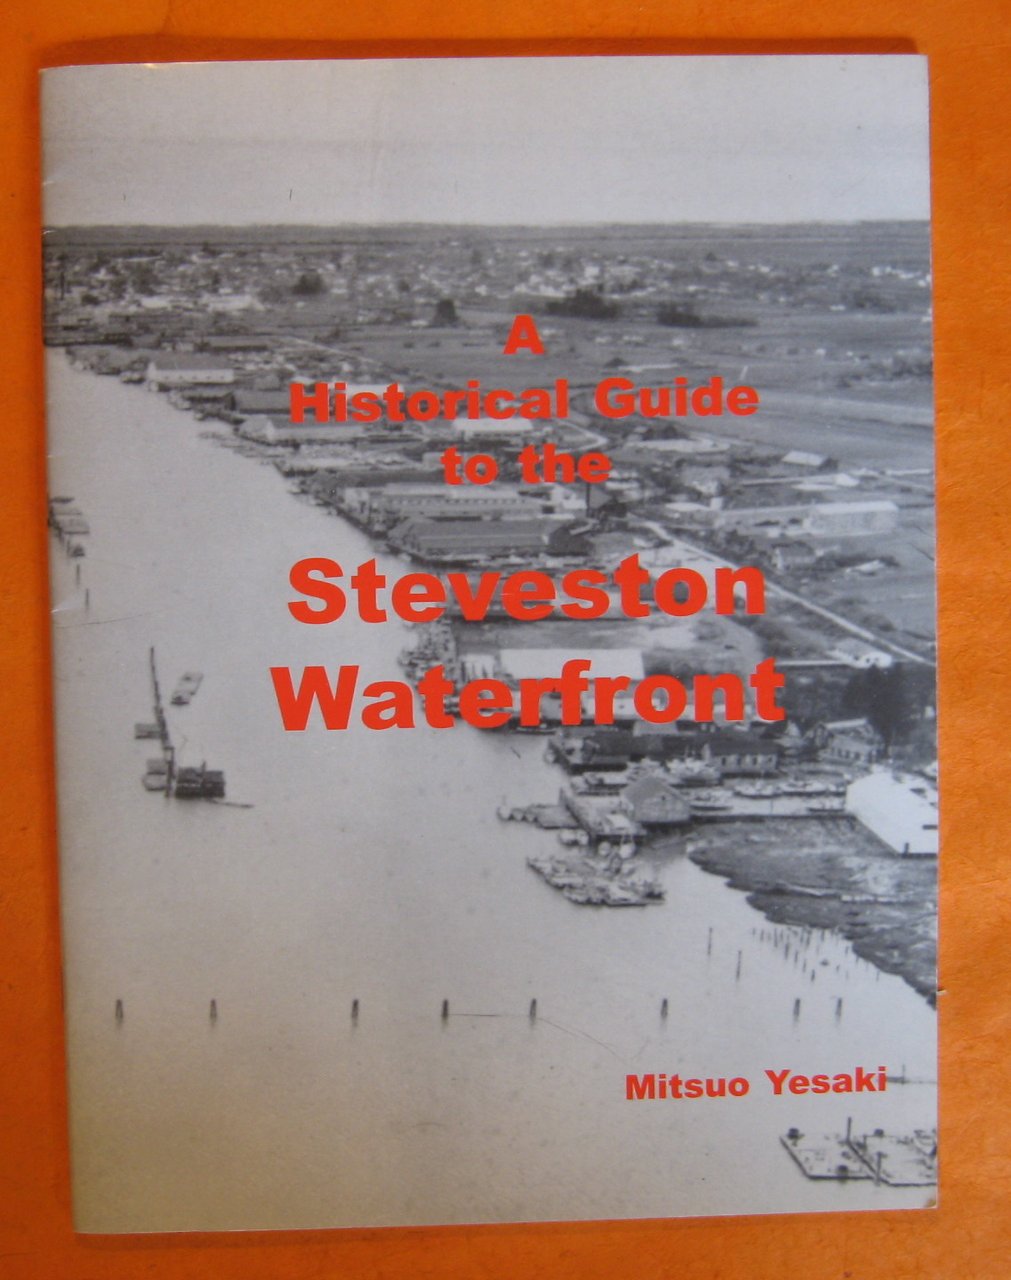 A Historical Guide to the Steveston Waterfront